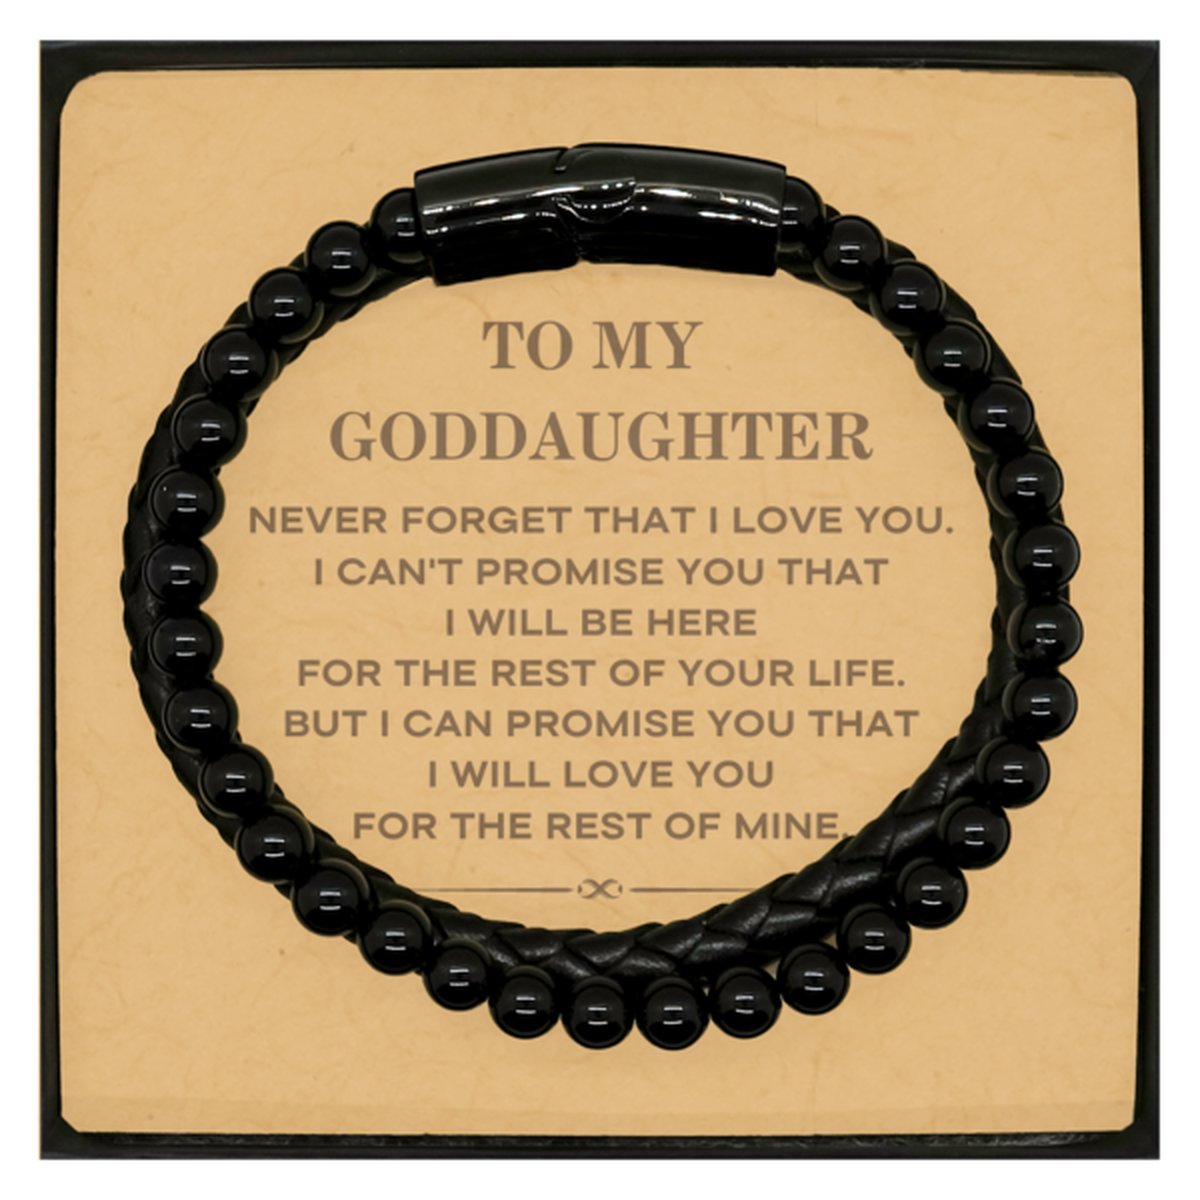 To My Goddaughter Gifts, I will love you for the rest of mine, Love Goddaughter Bracelet, Birthday Christmas Unique Stone Leather Bracelets For Goddaughter